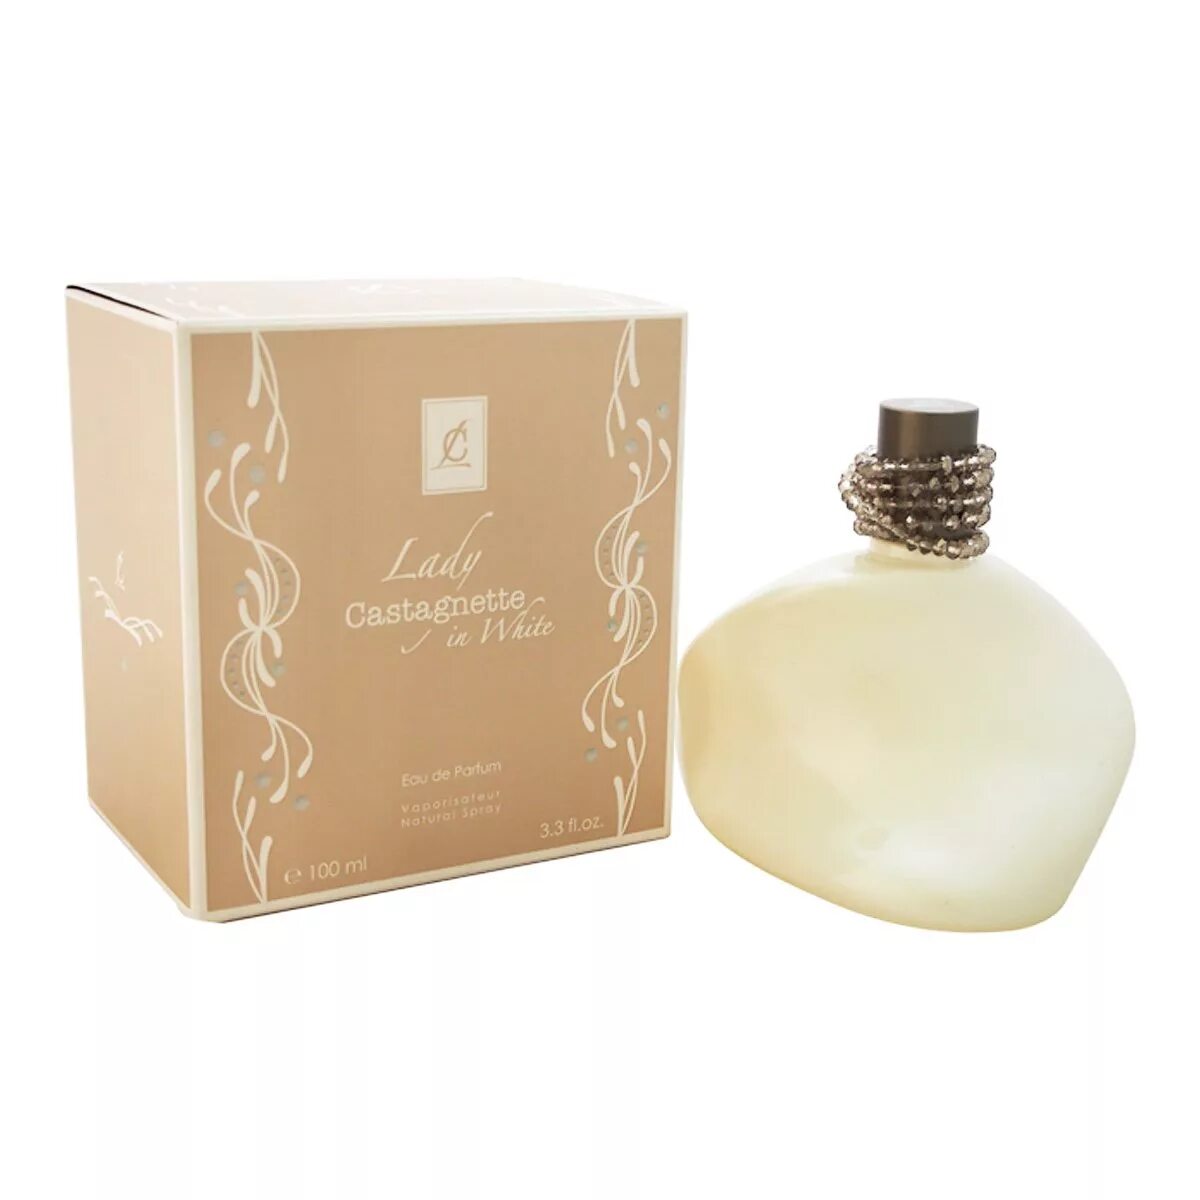 Lady castagnette in white. Парфюм Lady Castagnette. Lulu Castagnette Lady Castagnette 100 ml EDP. Lulu Castagnette Lady Castagnette in White 100ml EDP. Парфюмерная вода Lulu Castagnette "Lady in White".